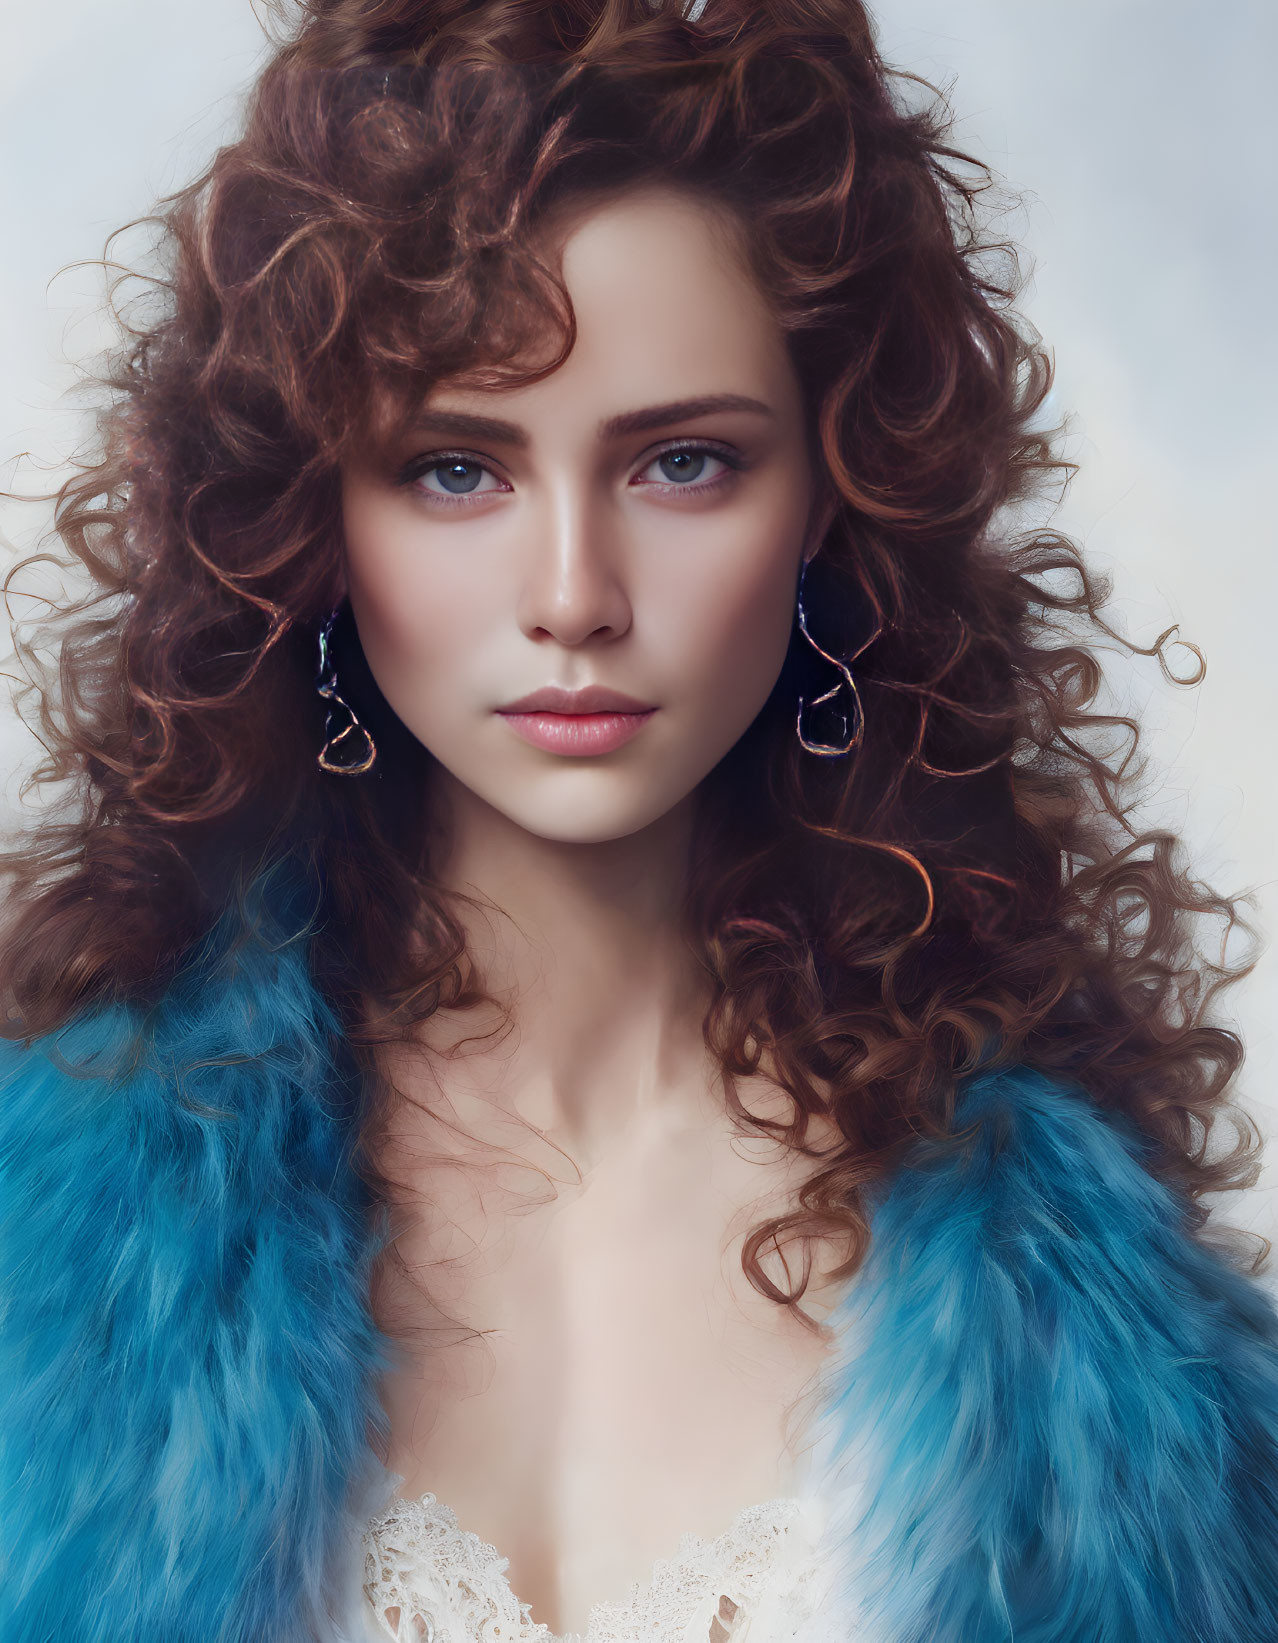 Curly-haired woman in blue feathered attire with striking blue eyes